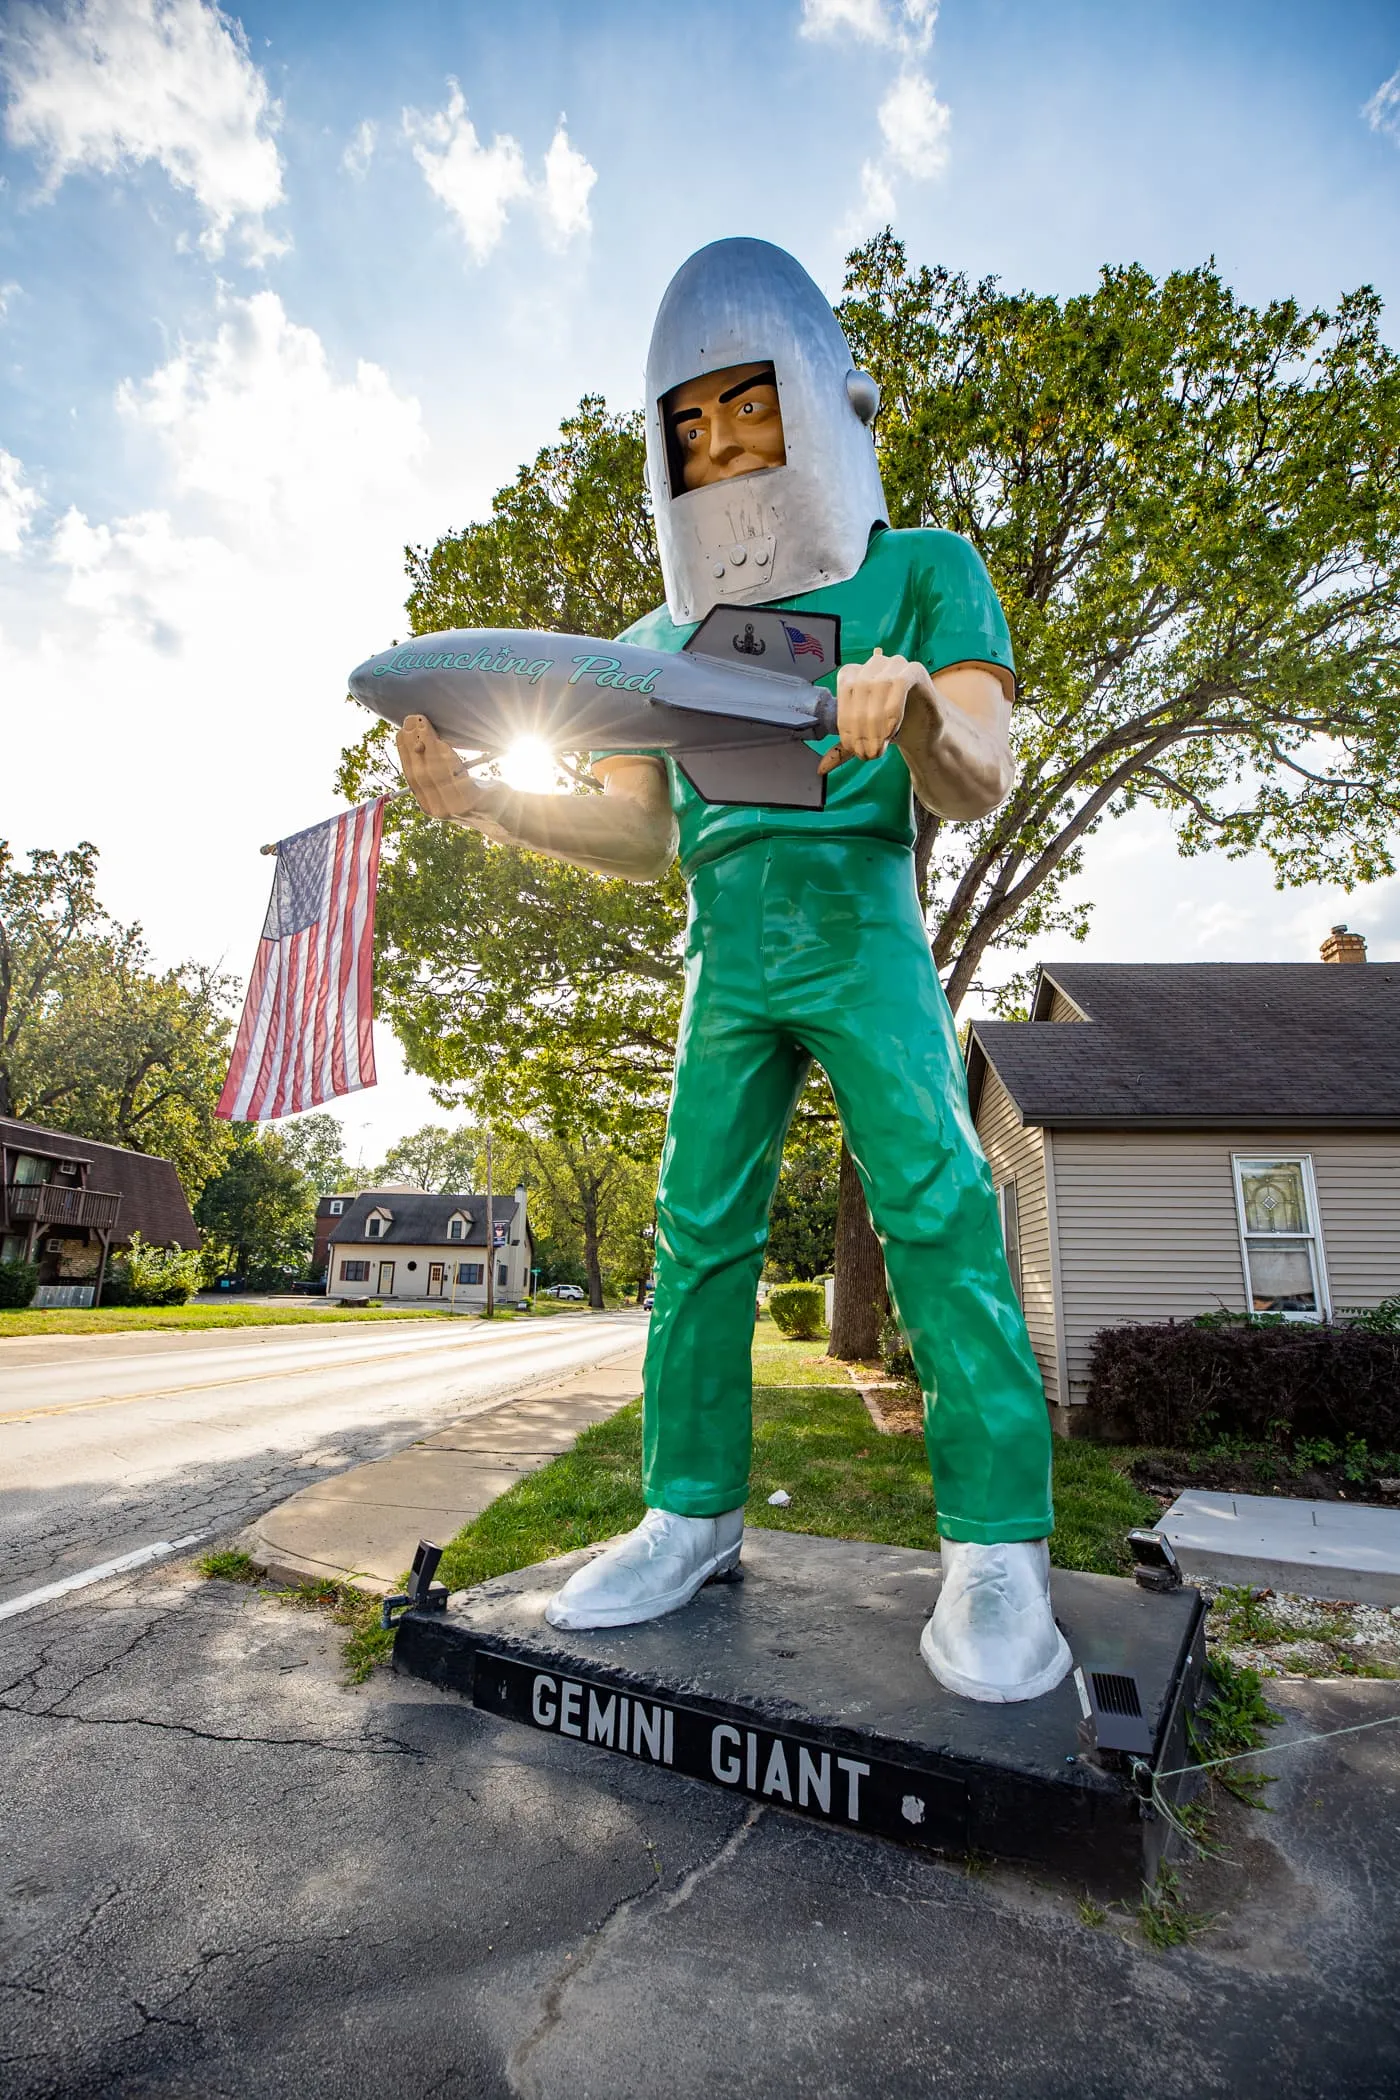 Gemini Giant muffler man at the Launching Pad in Wilmington, Illinois Route 66 roadside attraction